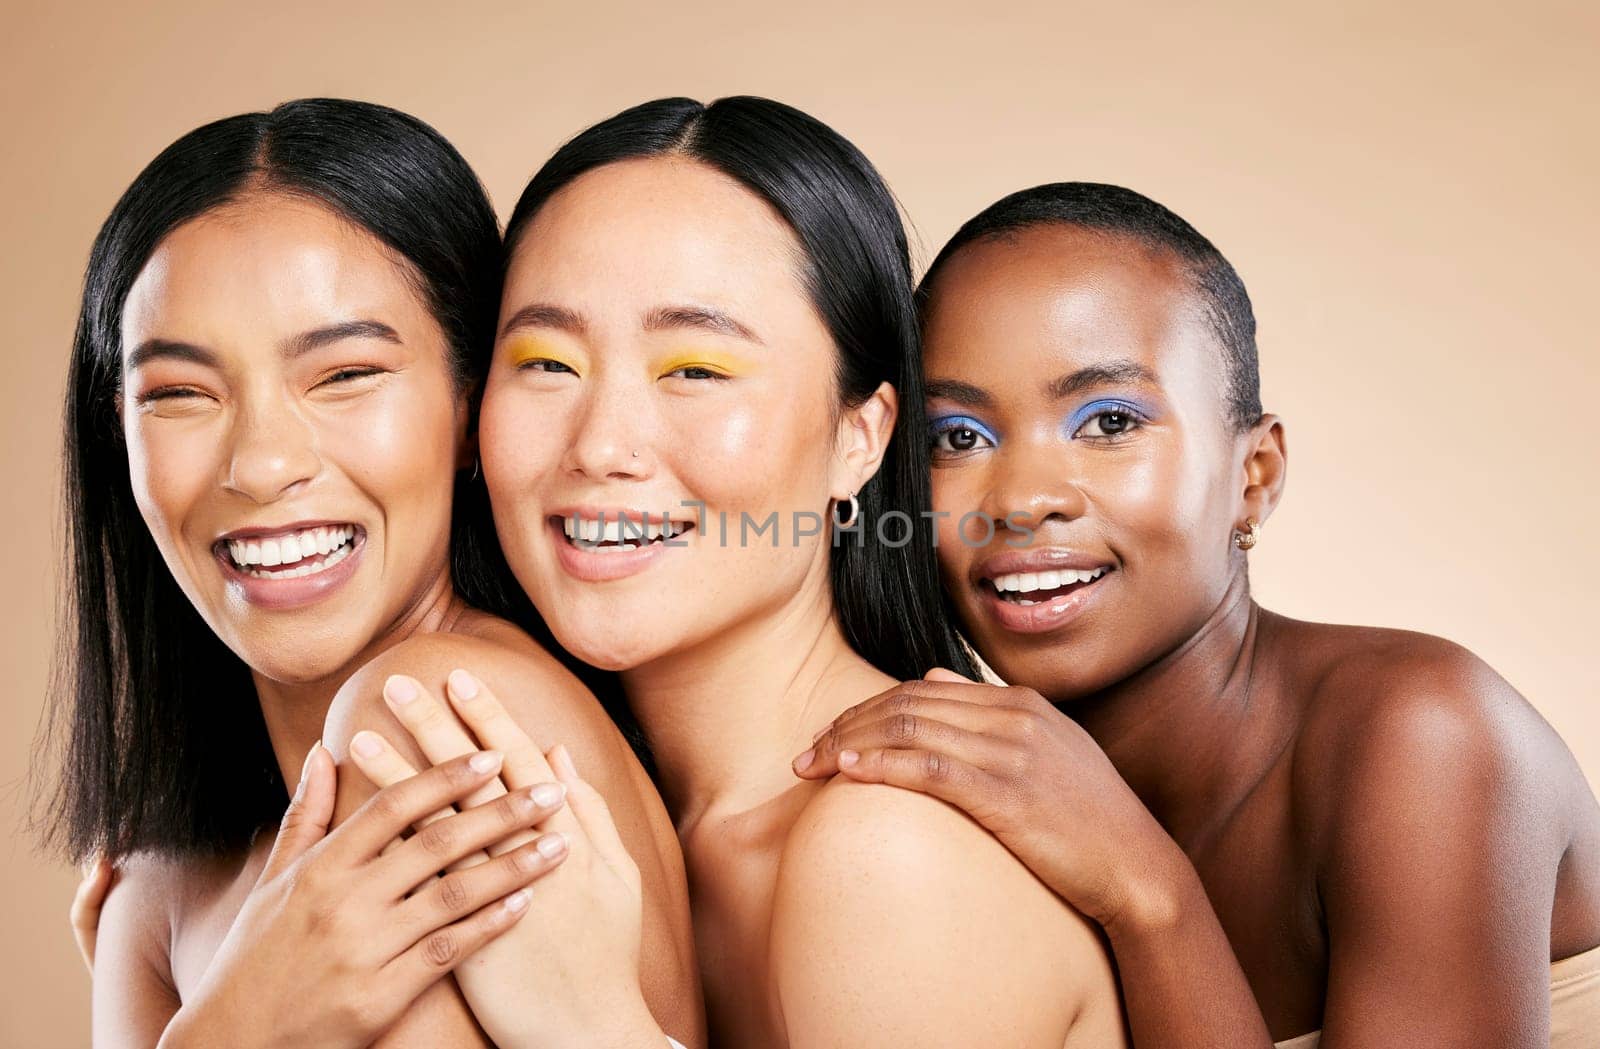 Makeup, diversity and woman happiness together for support, facial wellness and cosmetics dermatology care in brown background studio. Model, smile and interracial beauty inclusion with skin glow.